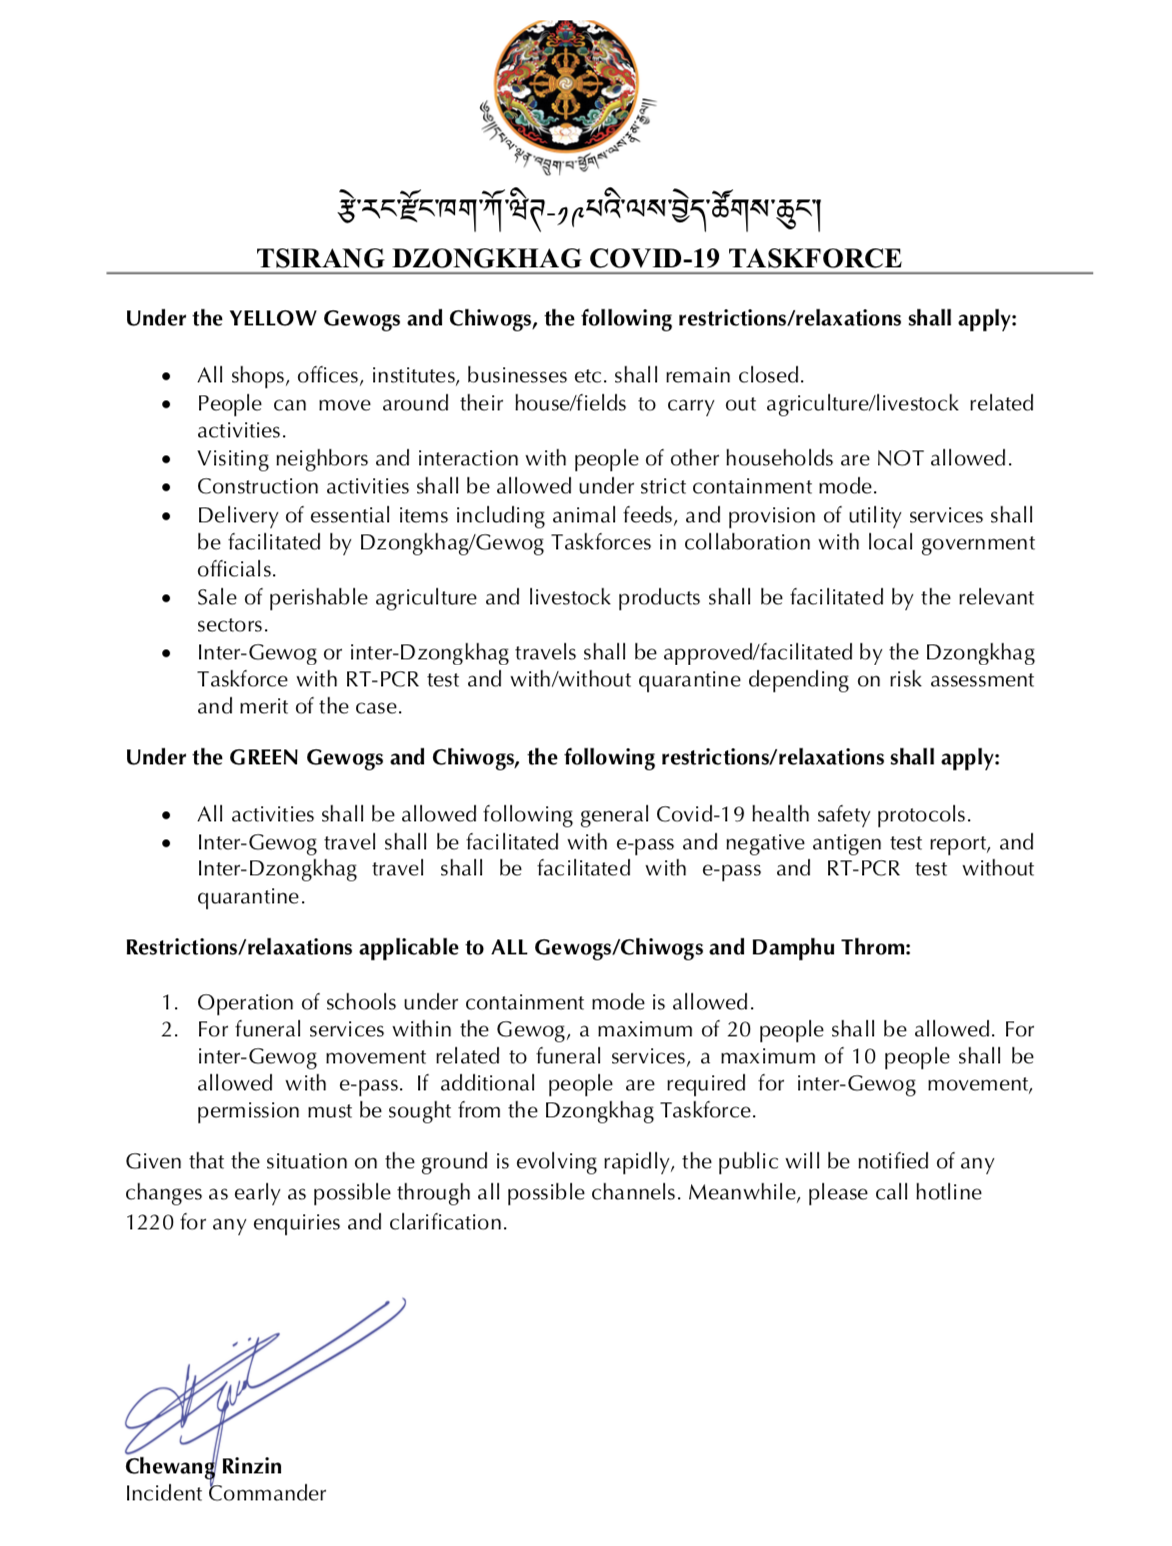 Notification on  colour-coding and phase-wise relaxation of lockdown in Tsirang Dzongkhag.